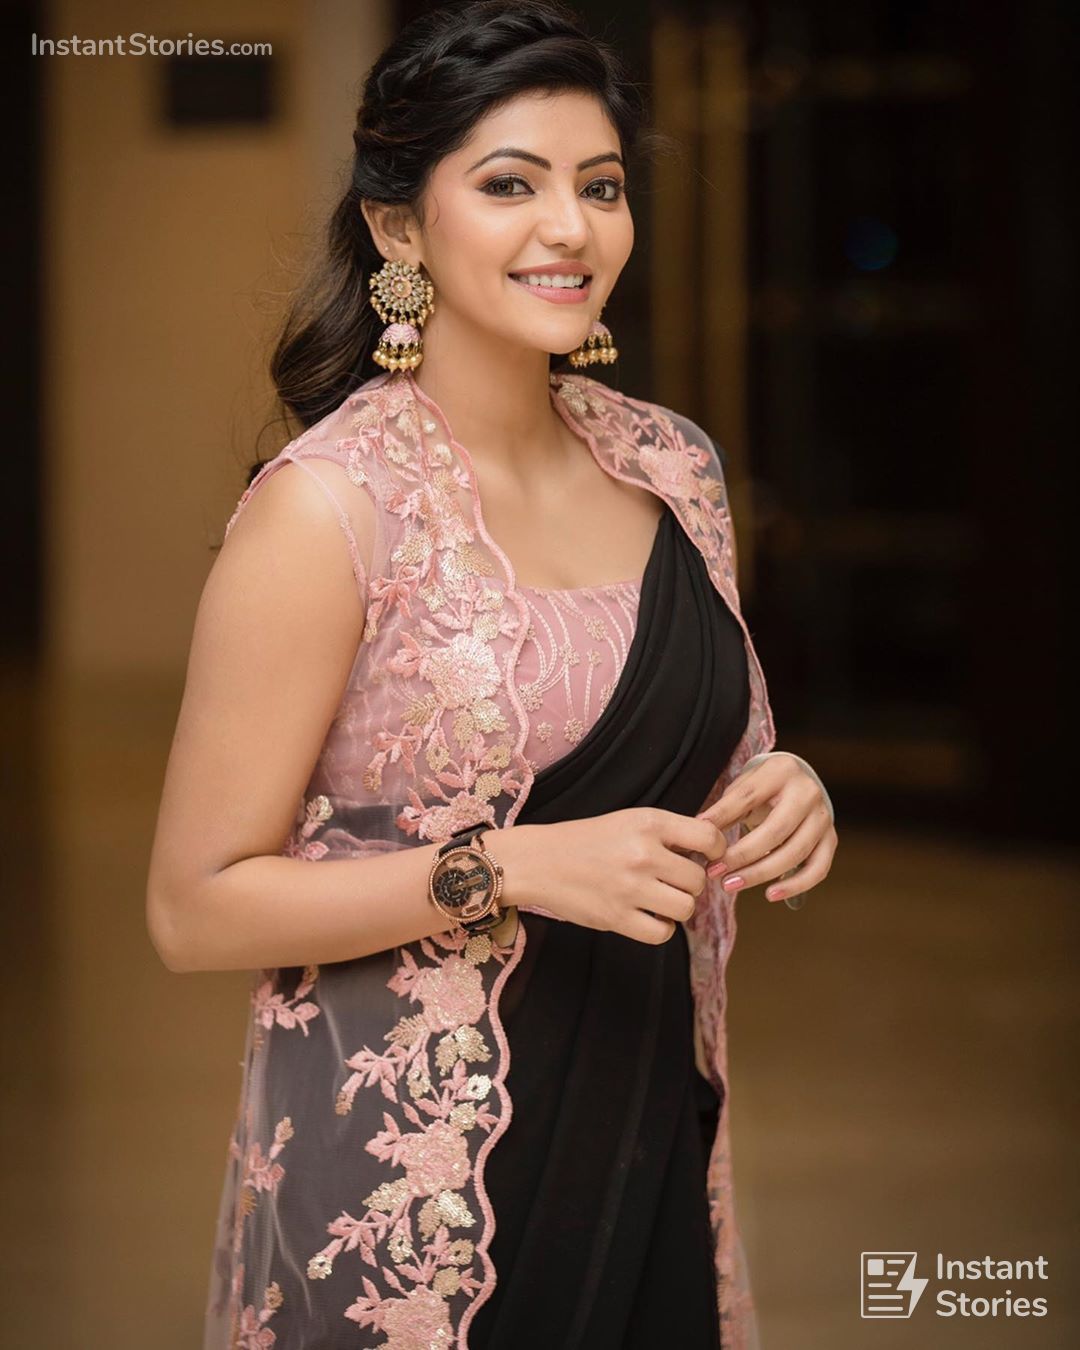 Athulya Ravi Hot Photoshoot Pictures/Wallpapers in HD Quality (1080p) (501) - Athulya Ravi